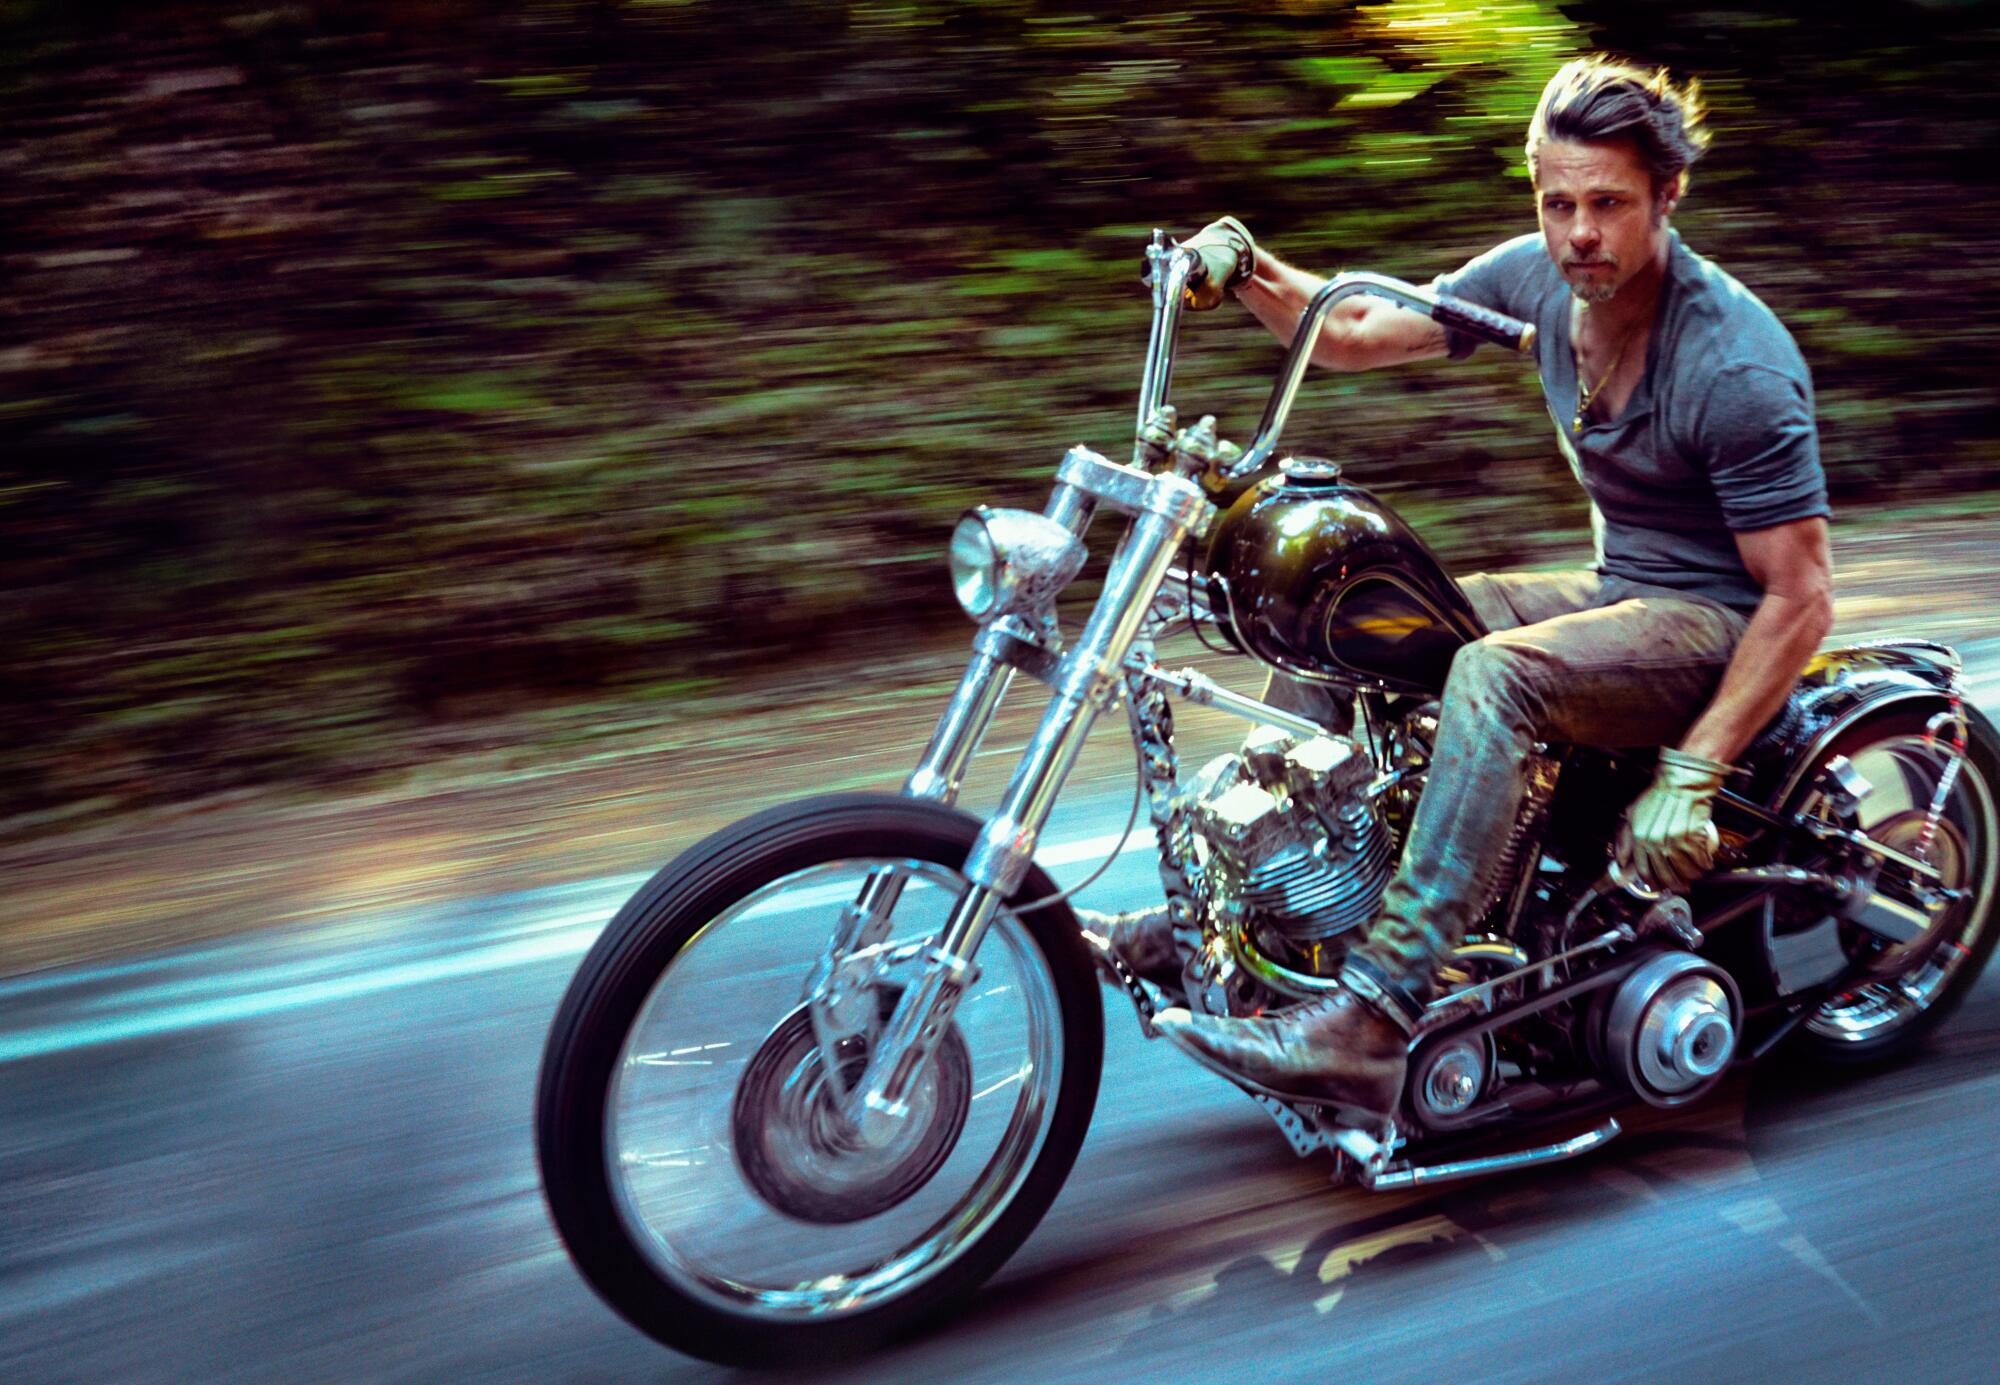 Brad Pitt, photographed in Humboldt, Calif., on Aug. 12, 2014, for the November 2014 issue of Details magazine.